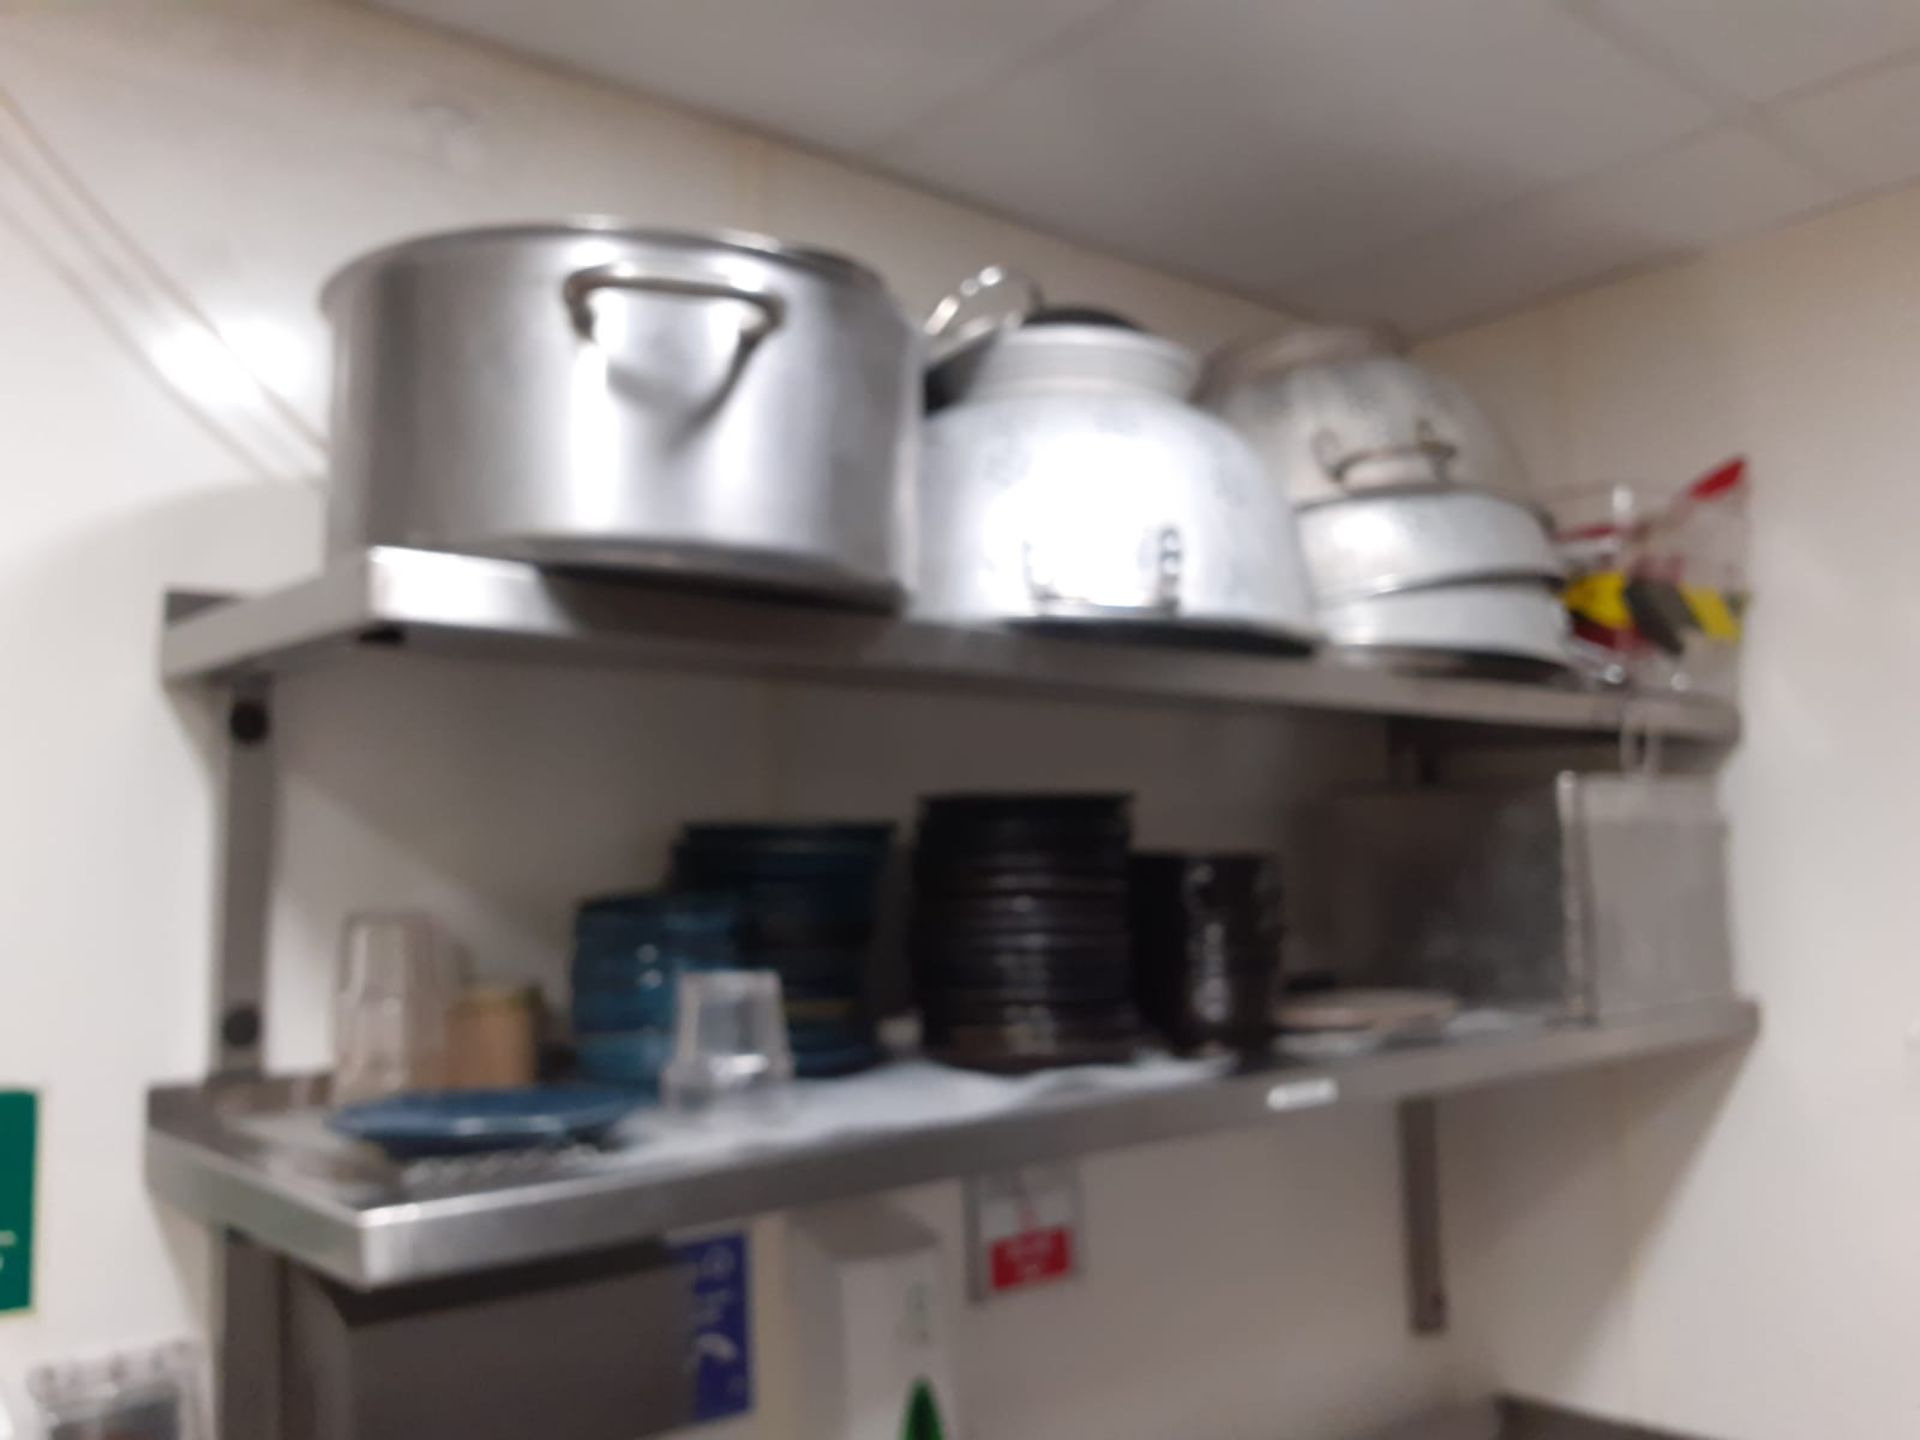 2 x Stainless Steel Shelves With Contents - Contents Include Various Pans etc - CL582 - Location: